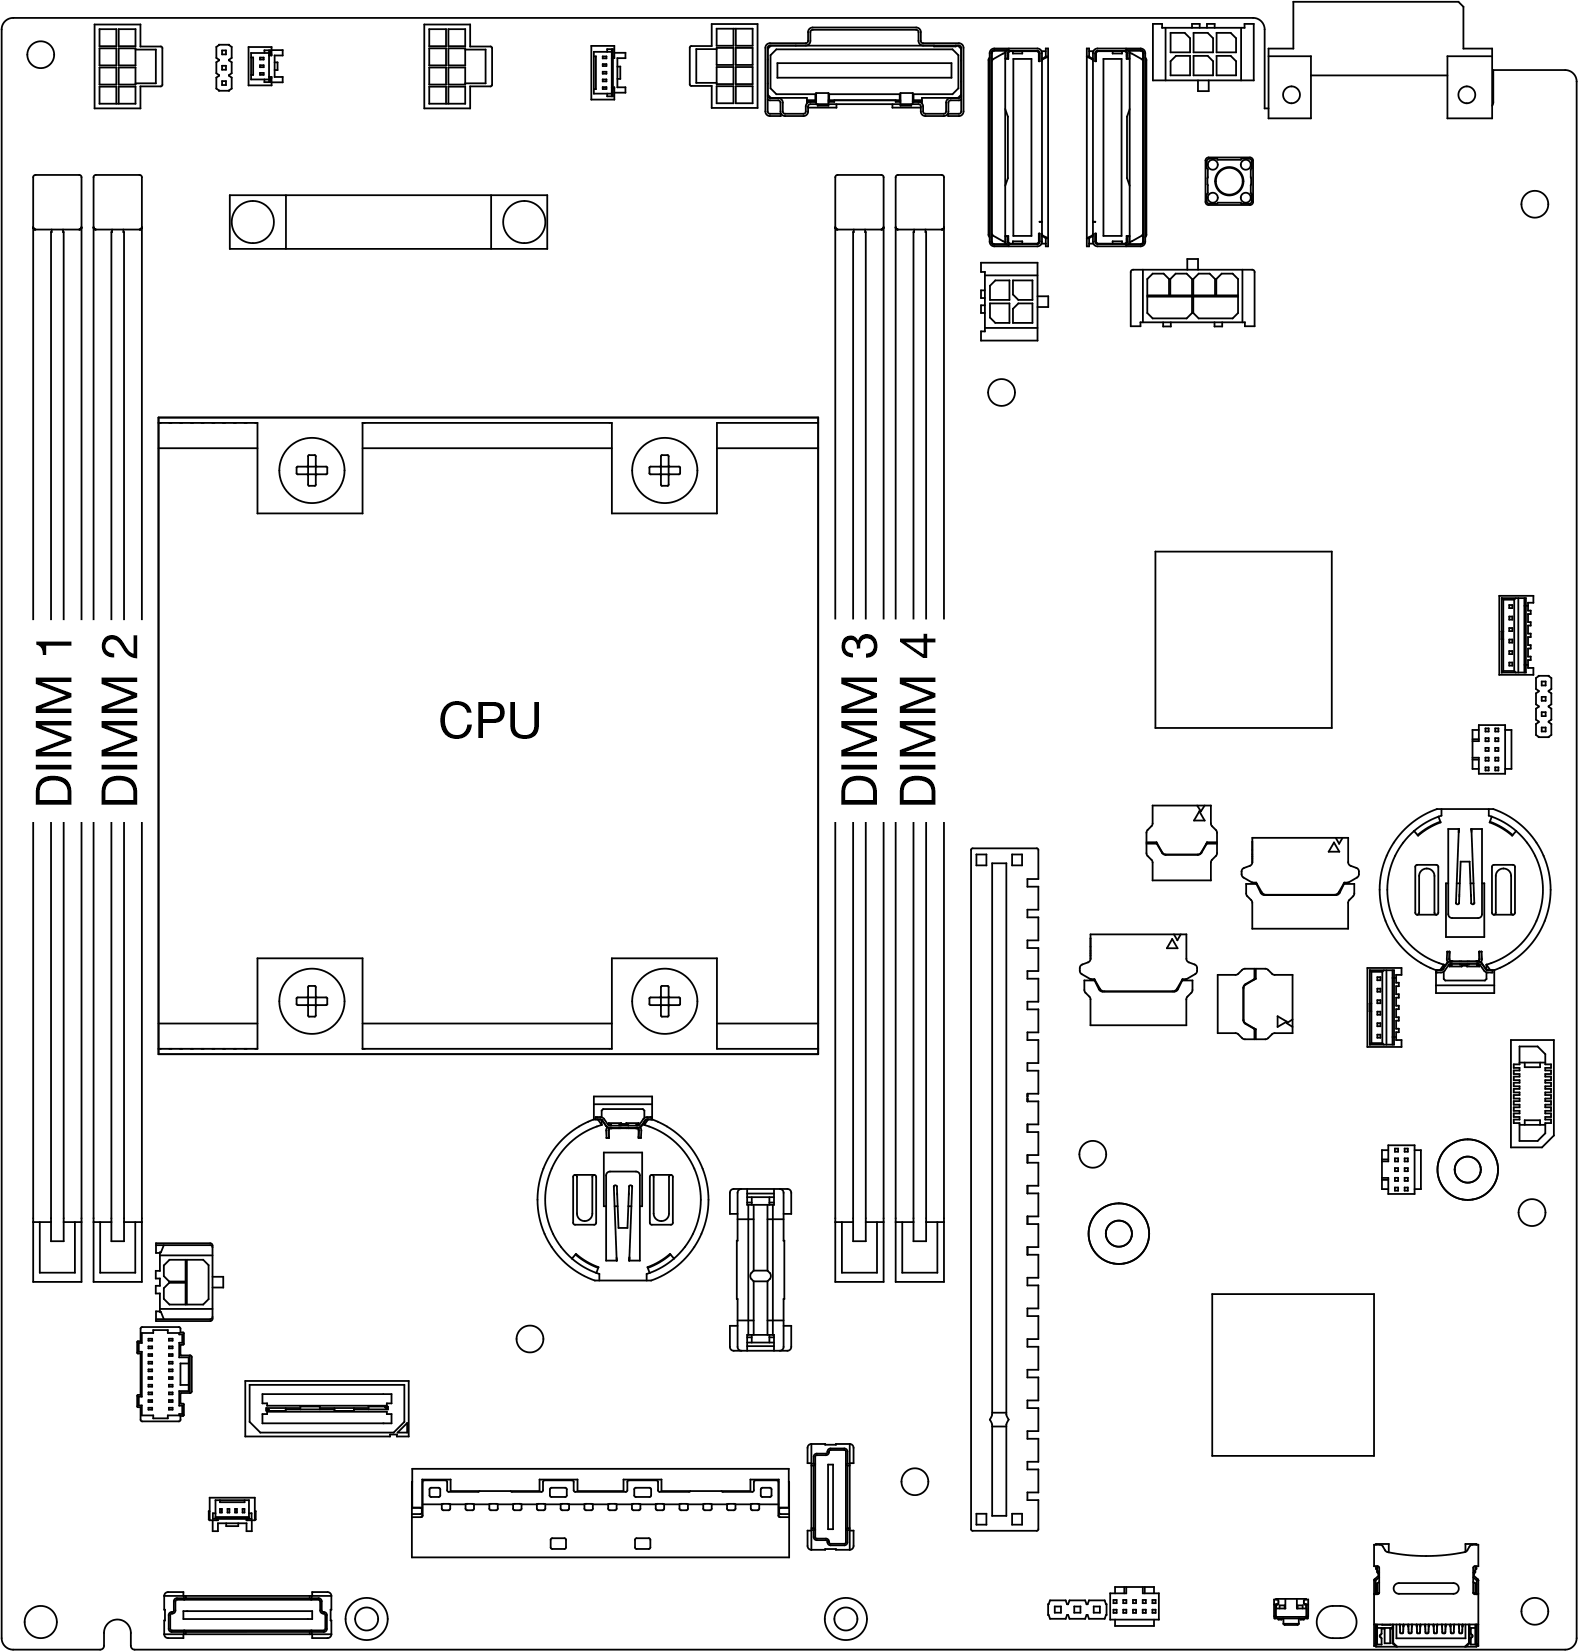 Location of the dimm slots